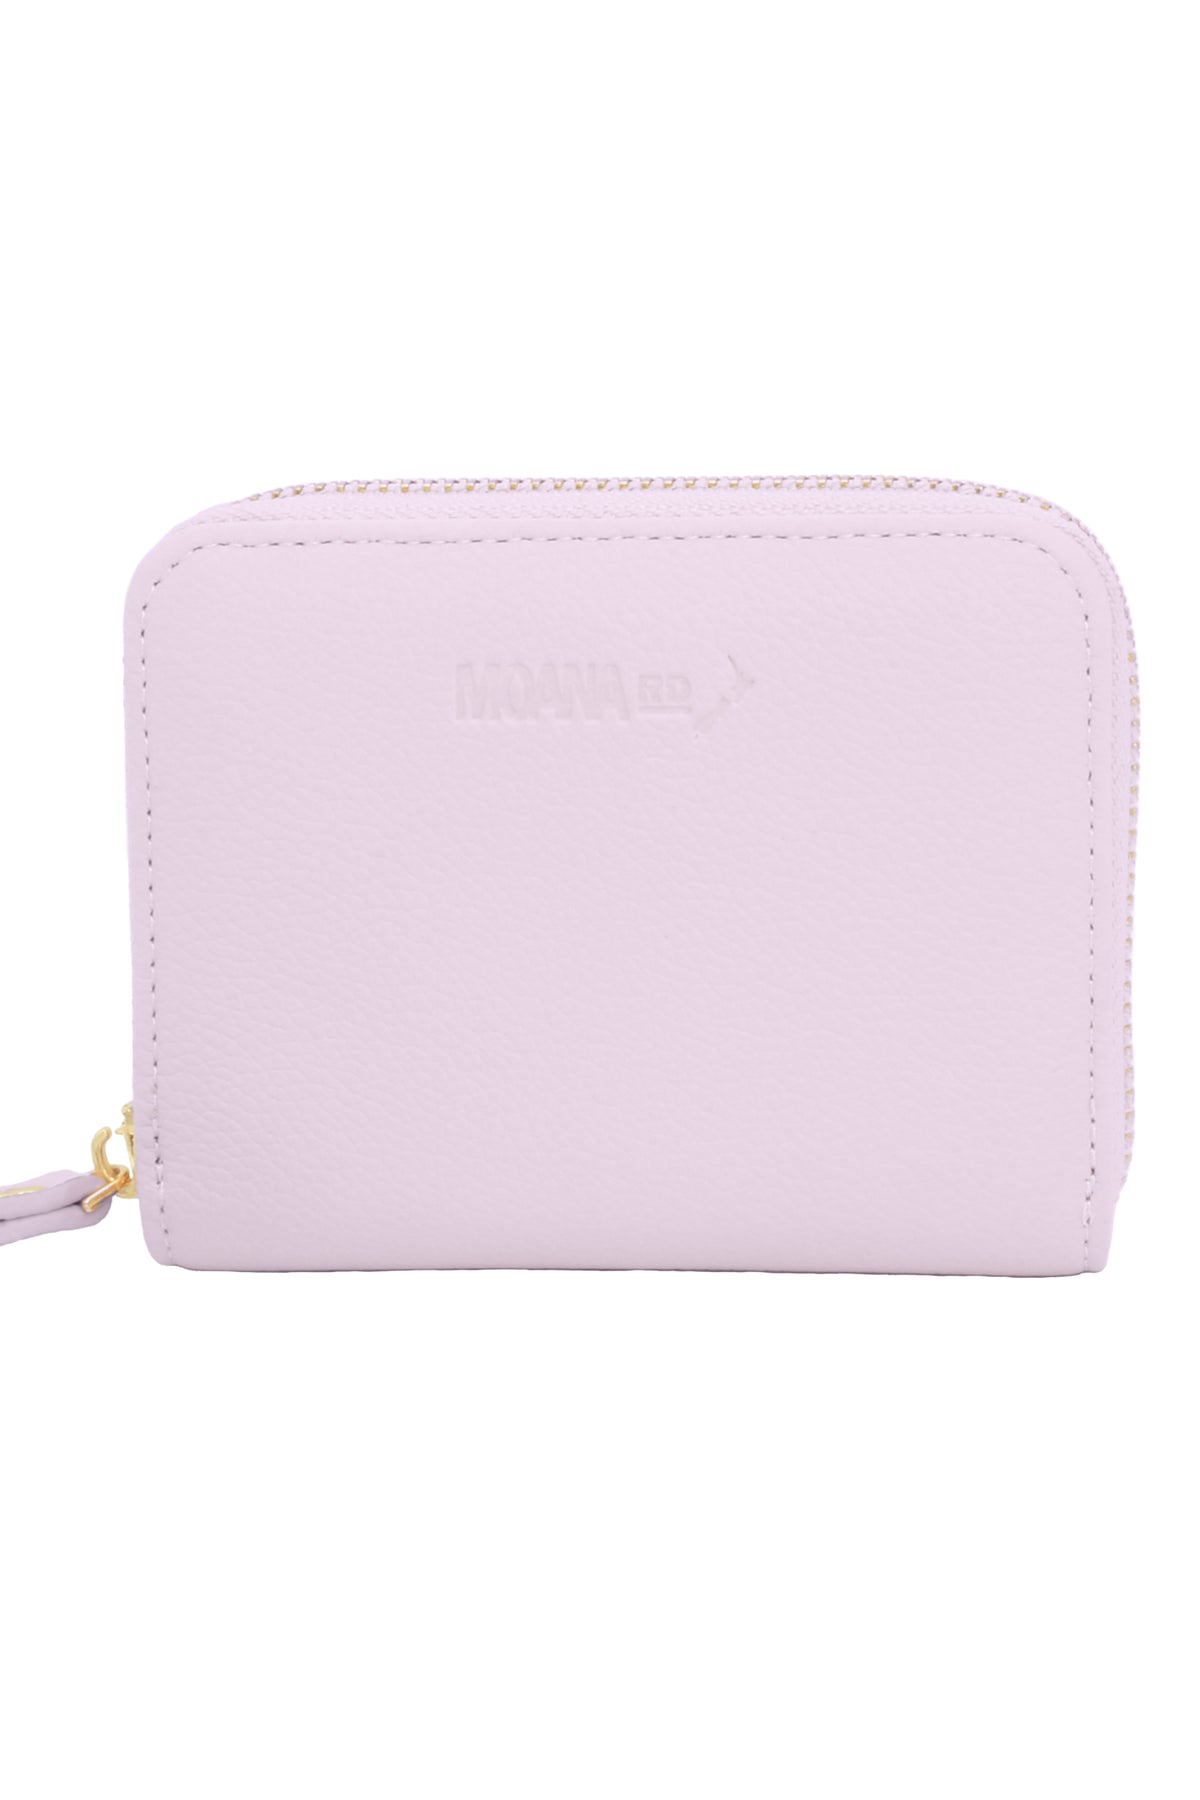 Mission Bay Wallet Lilac